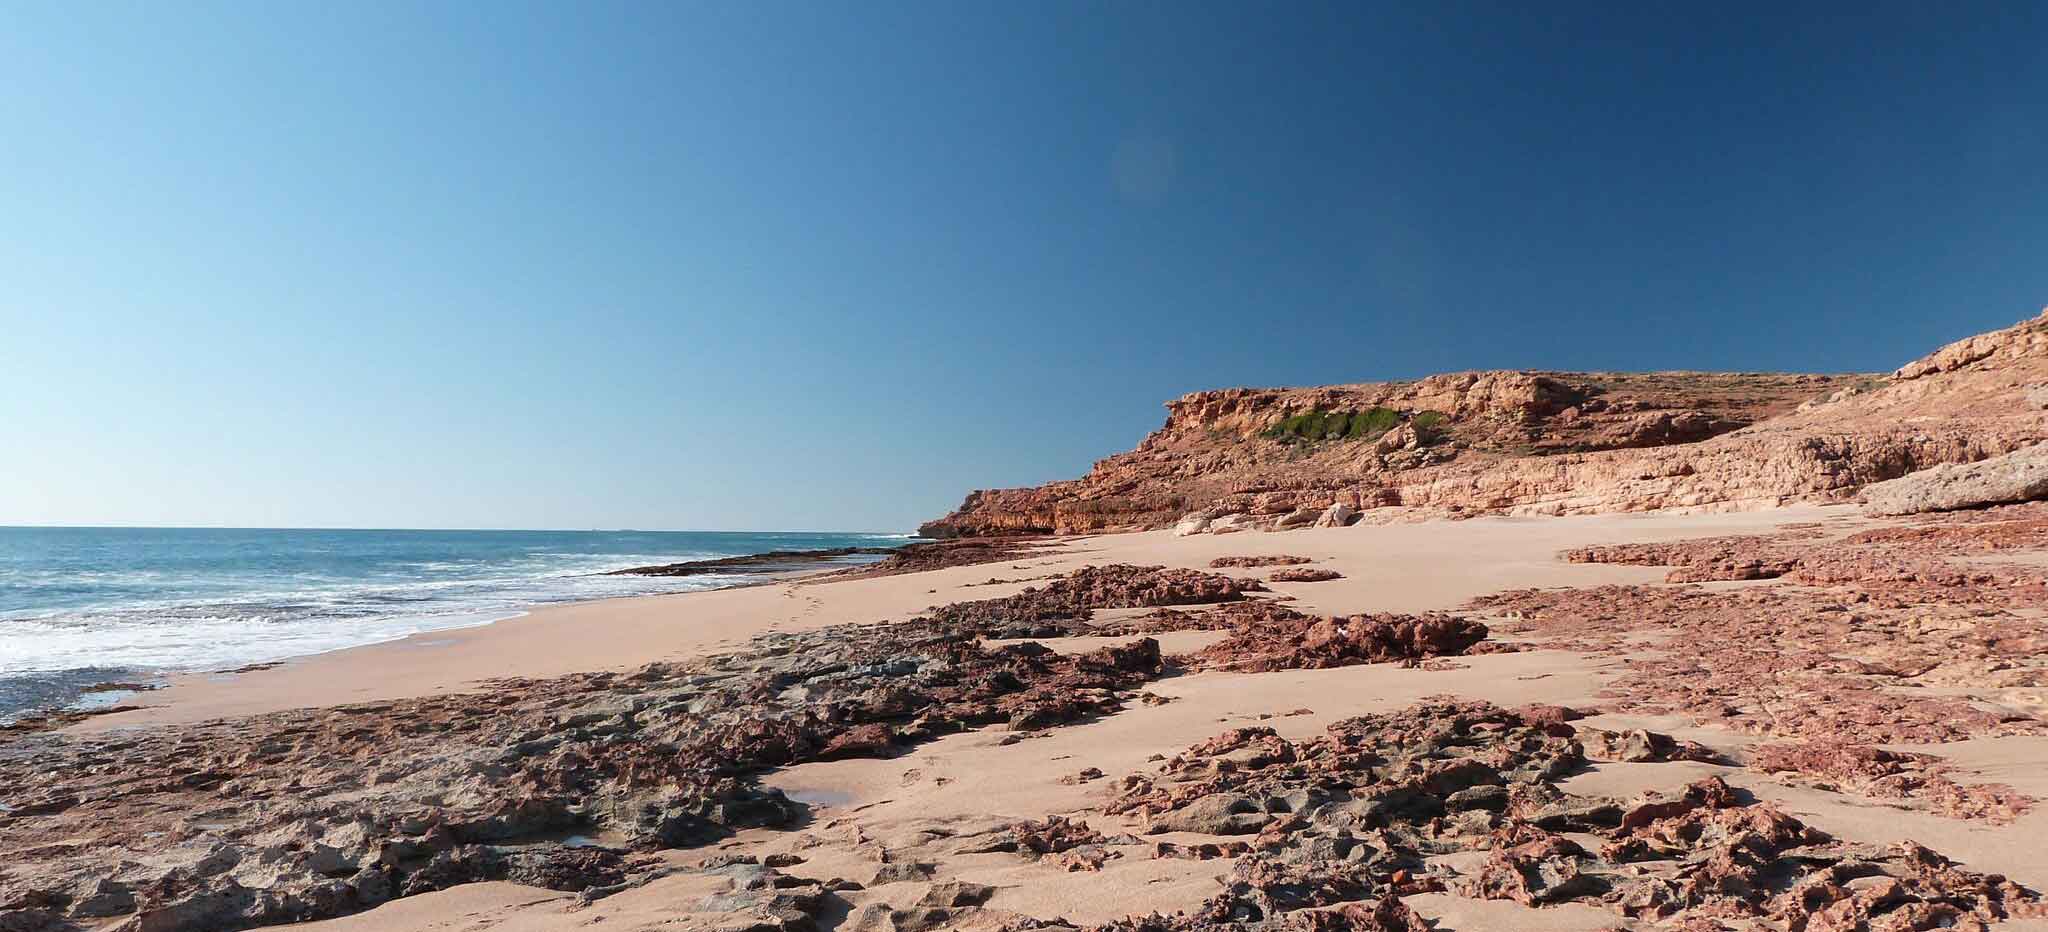 page banner image for article titled: Evidence of earliest Aboriginal occupation of Australian coast